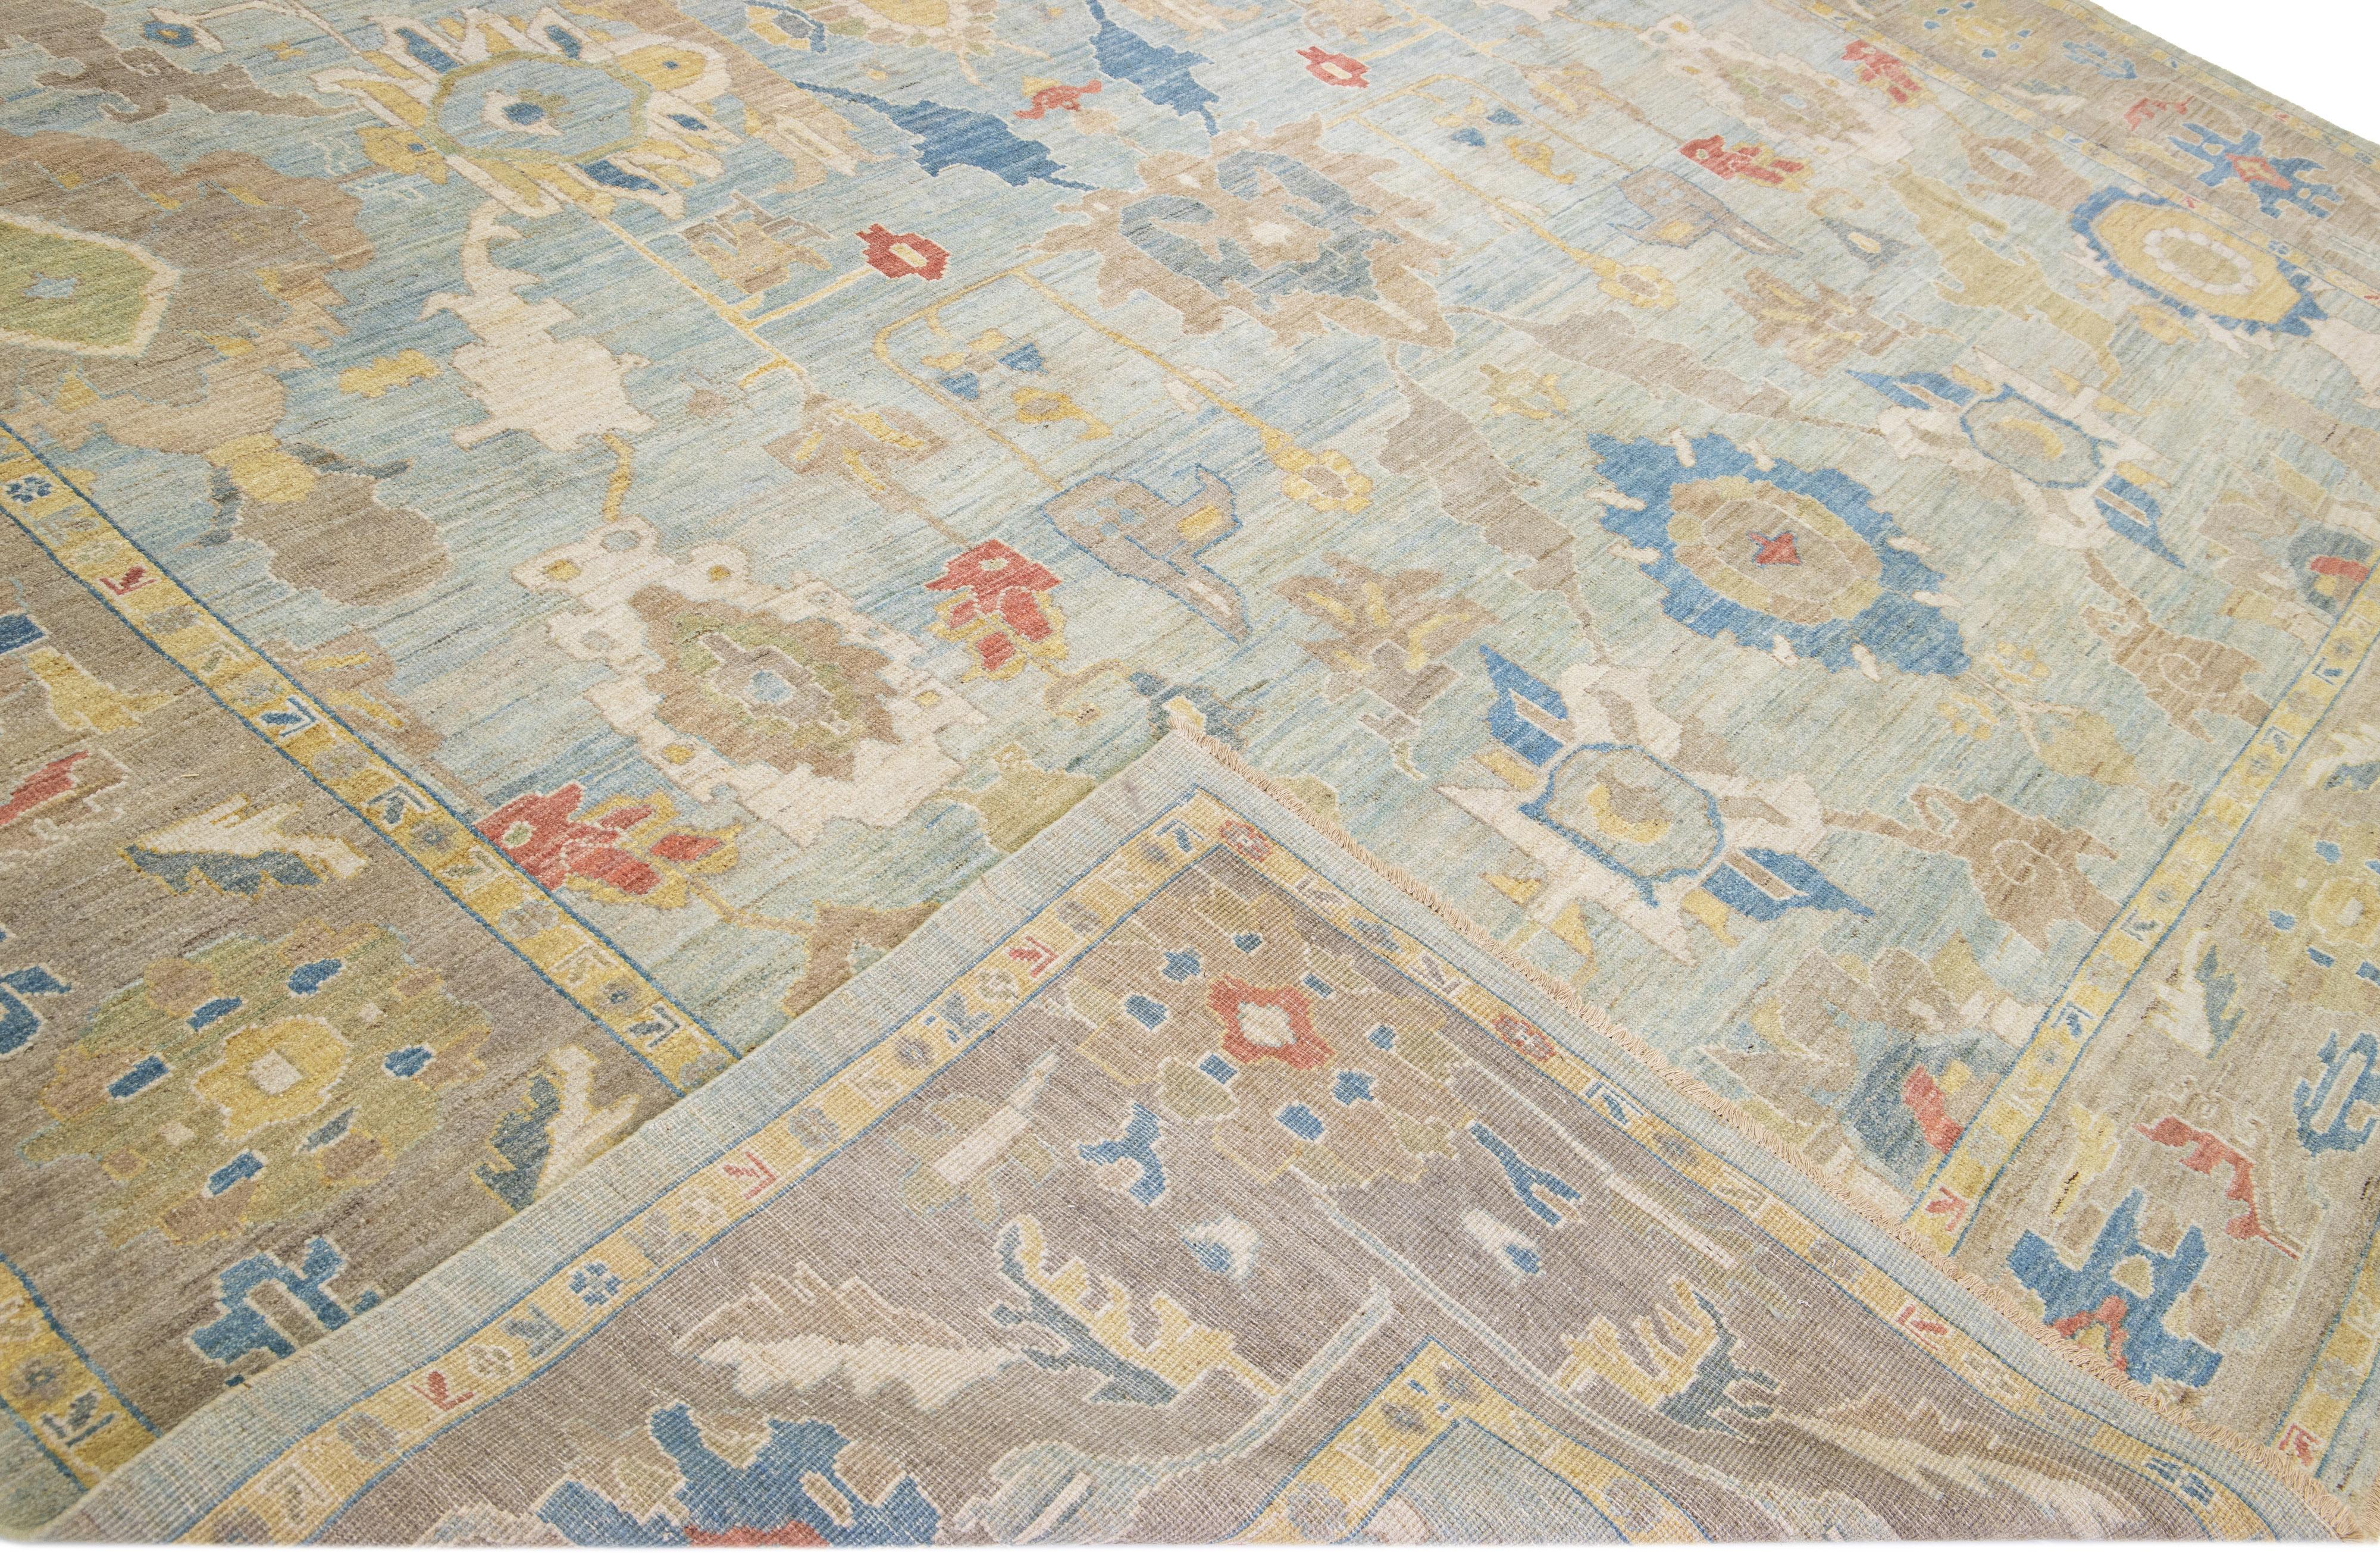 Beautiful modern Sultanabad hand-knotted wool rug with a blue field. This Sultanabad rug has a brown frame and multicolor accents in a gorgeous all-over classic floral pattern design.

This rug measures: 13